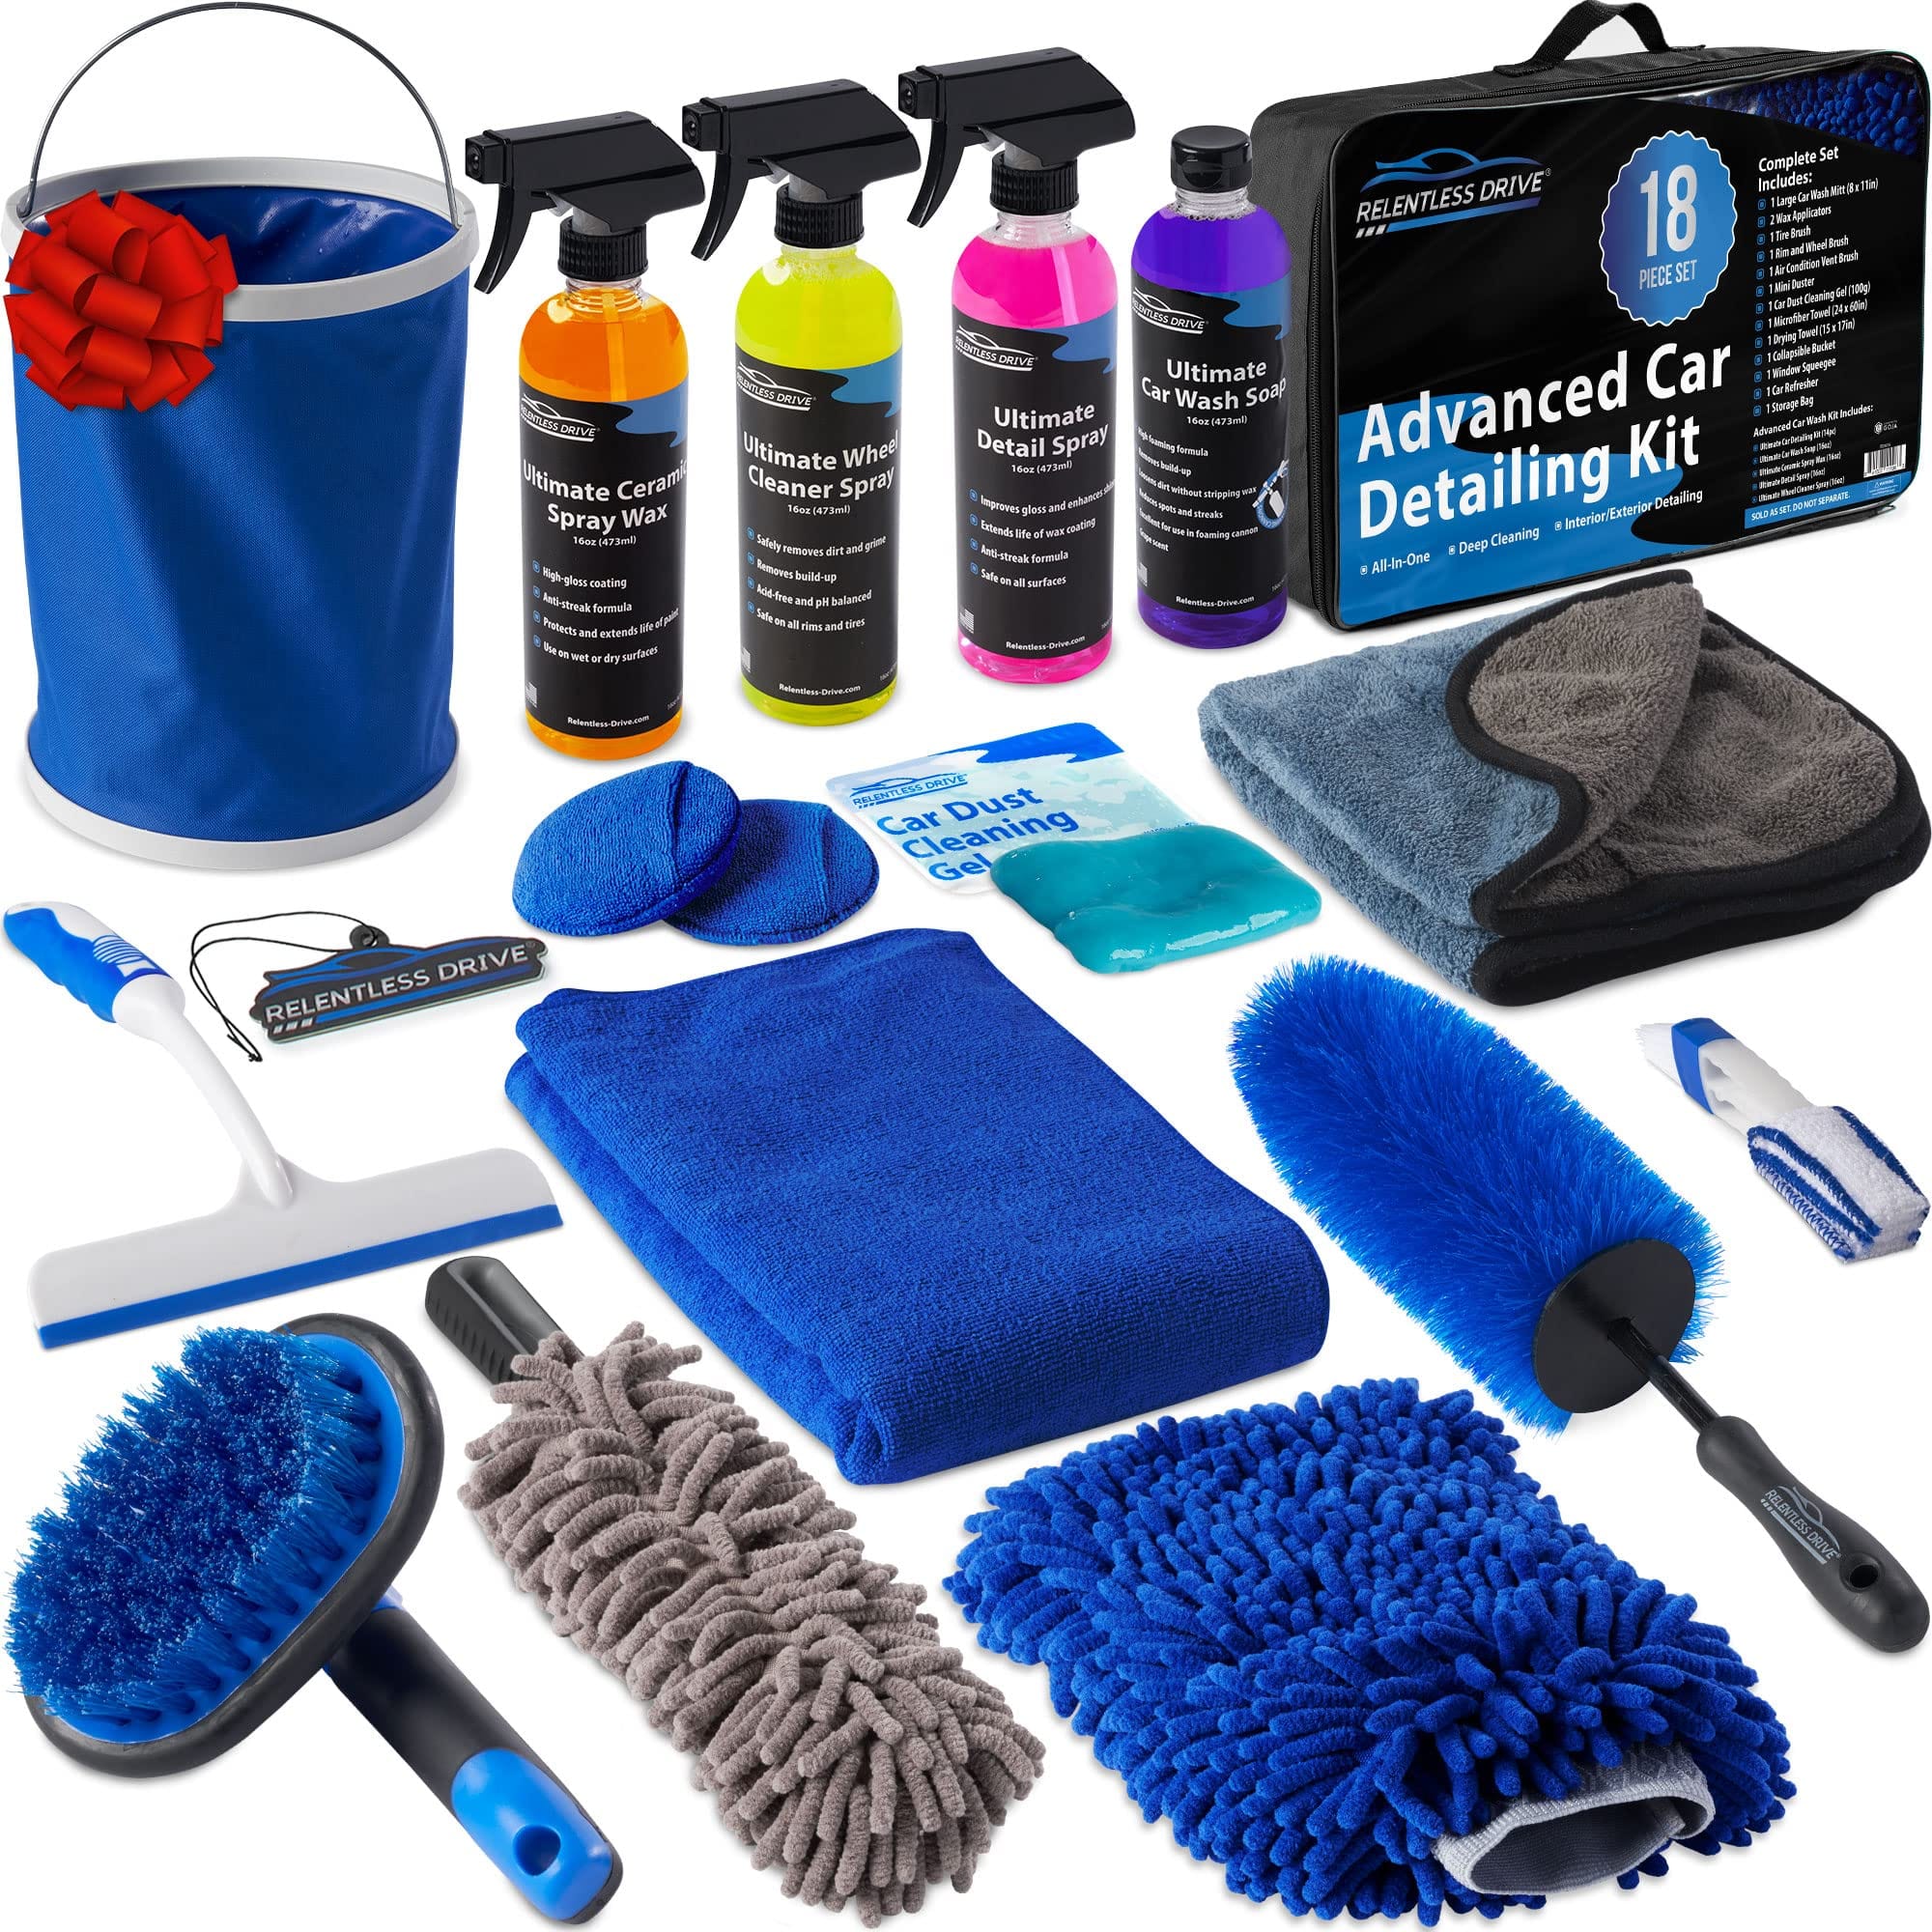 Relentless Drive Car Upholstery Cleaner Kit - Car Seat Cleaner & Car C